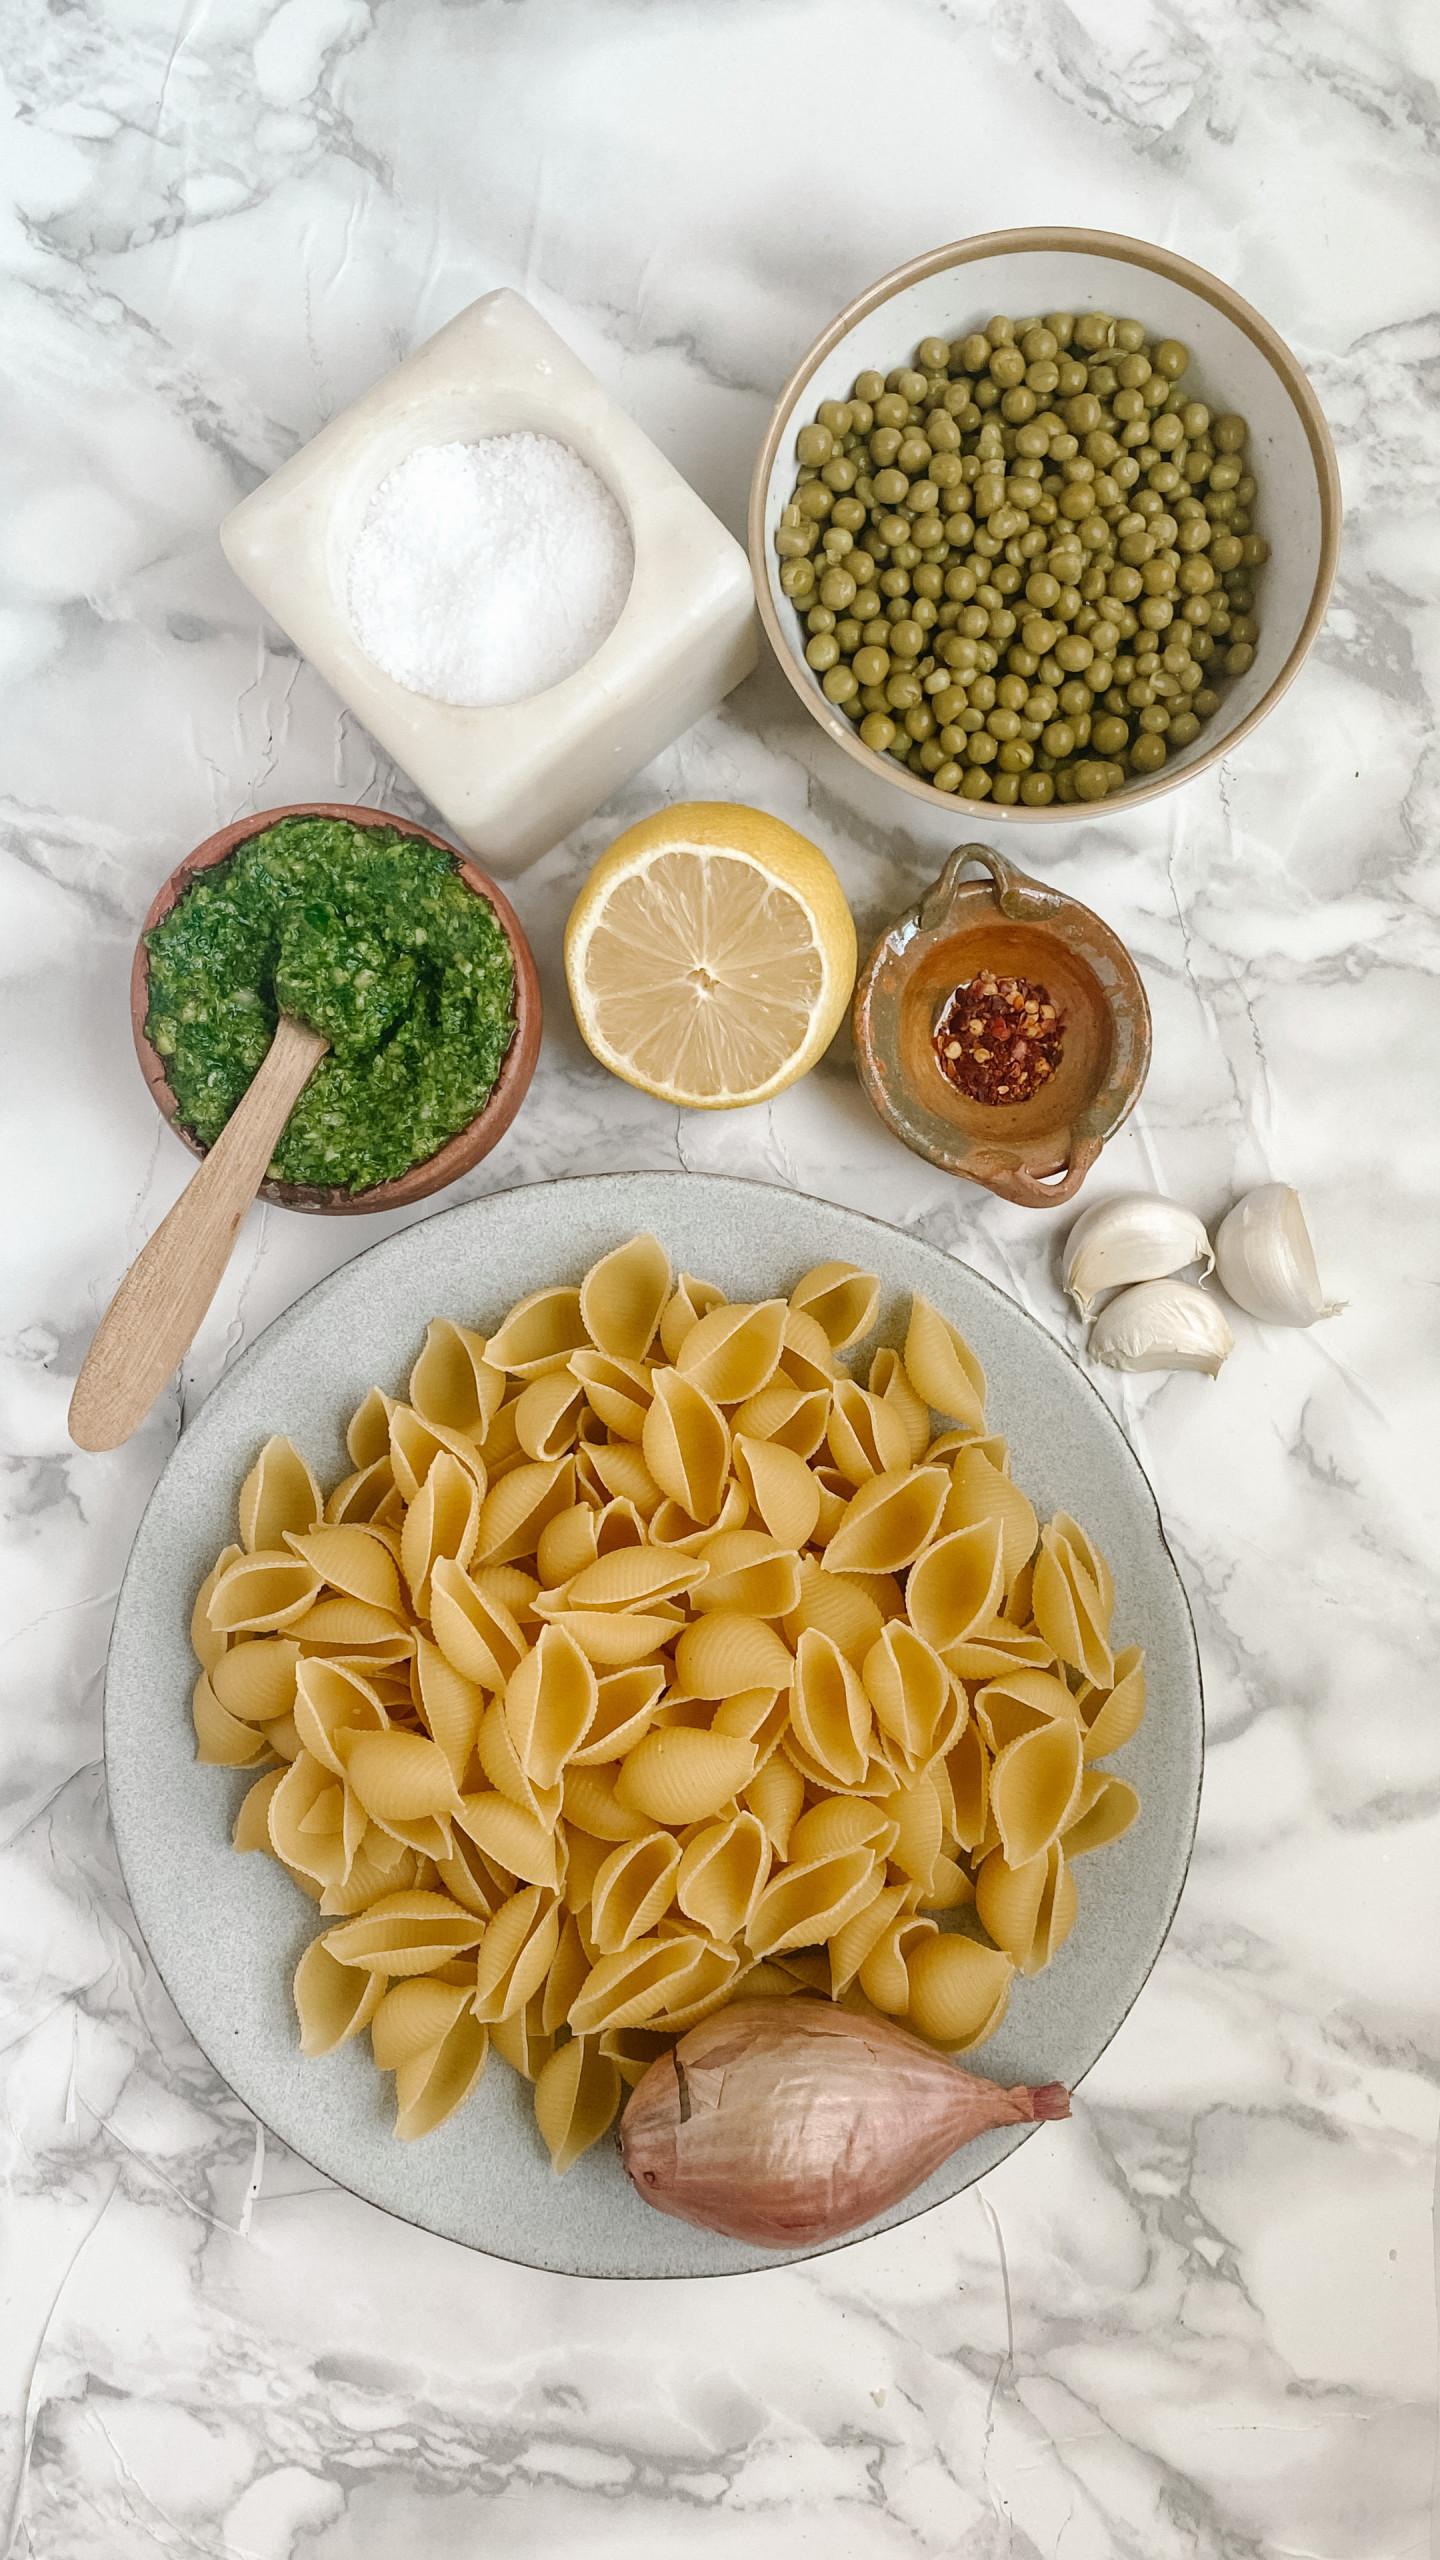 Bowls with pasta shells, peas, pesto, a lemon, red pepper flakes, a shallot, salt, and garlic on a white marble counter.